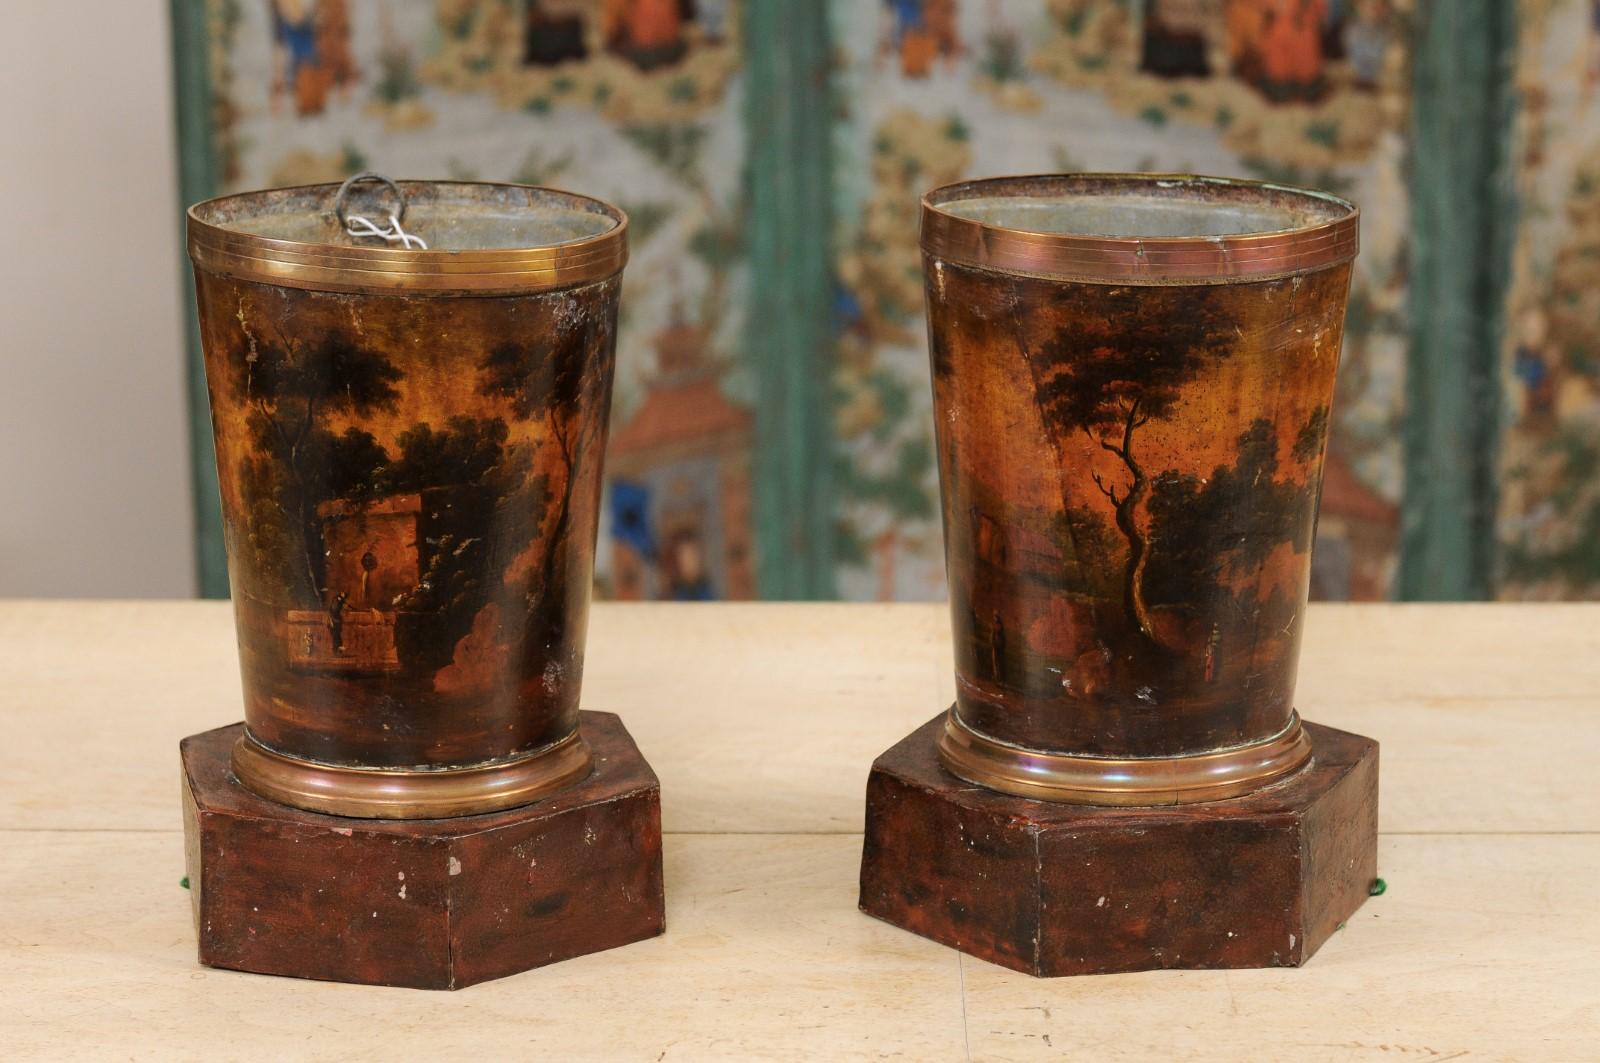  19th Century Painted Tole Cachepots with Landscape Scenes, 19th Century France 3